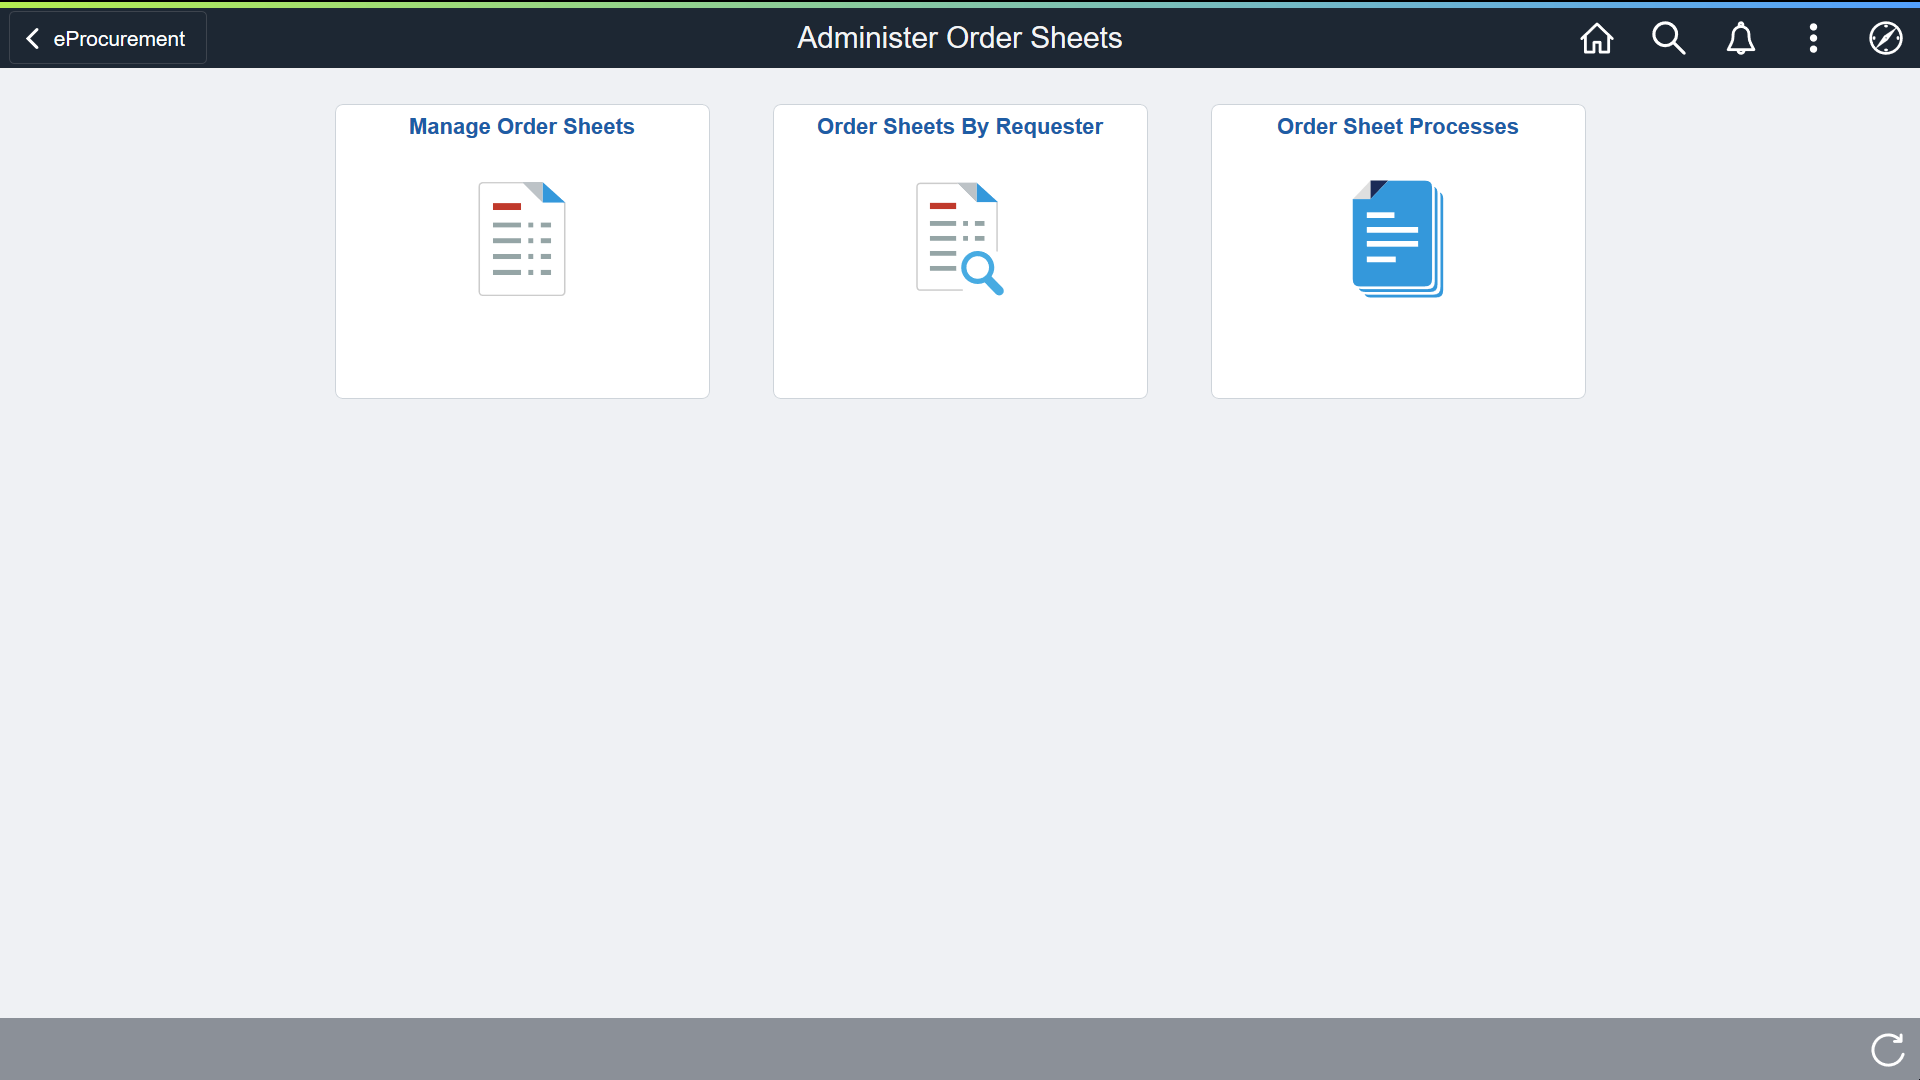 Administer Order Sheets Homepage